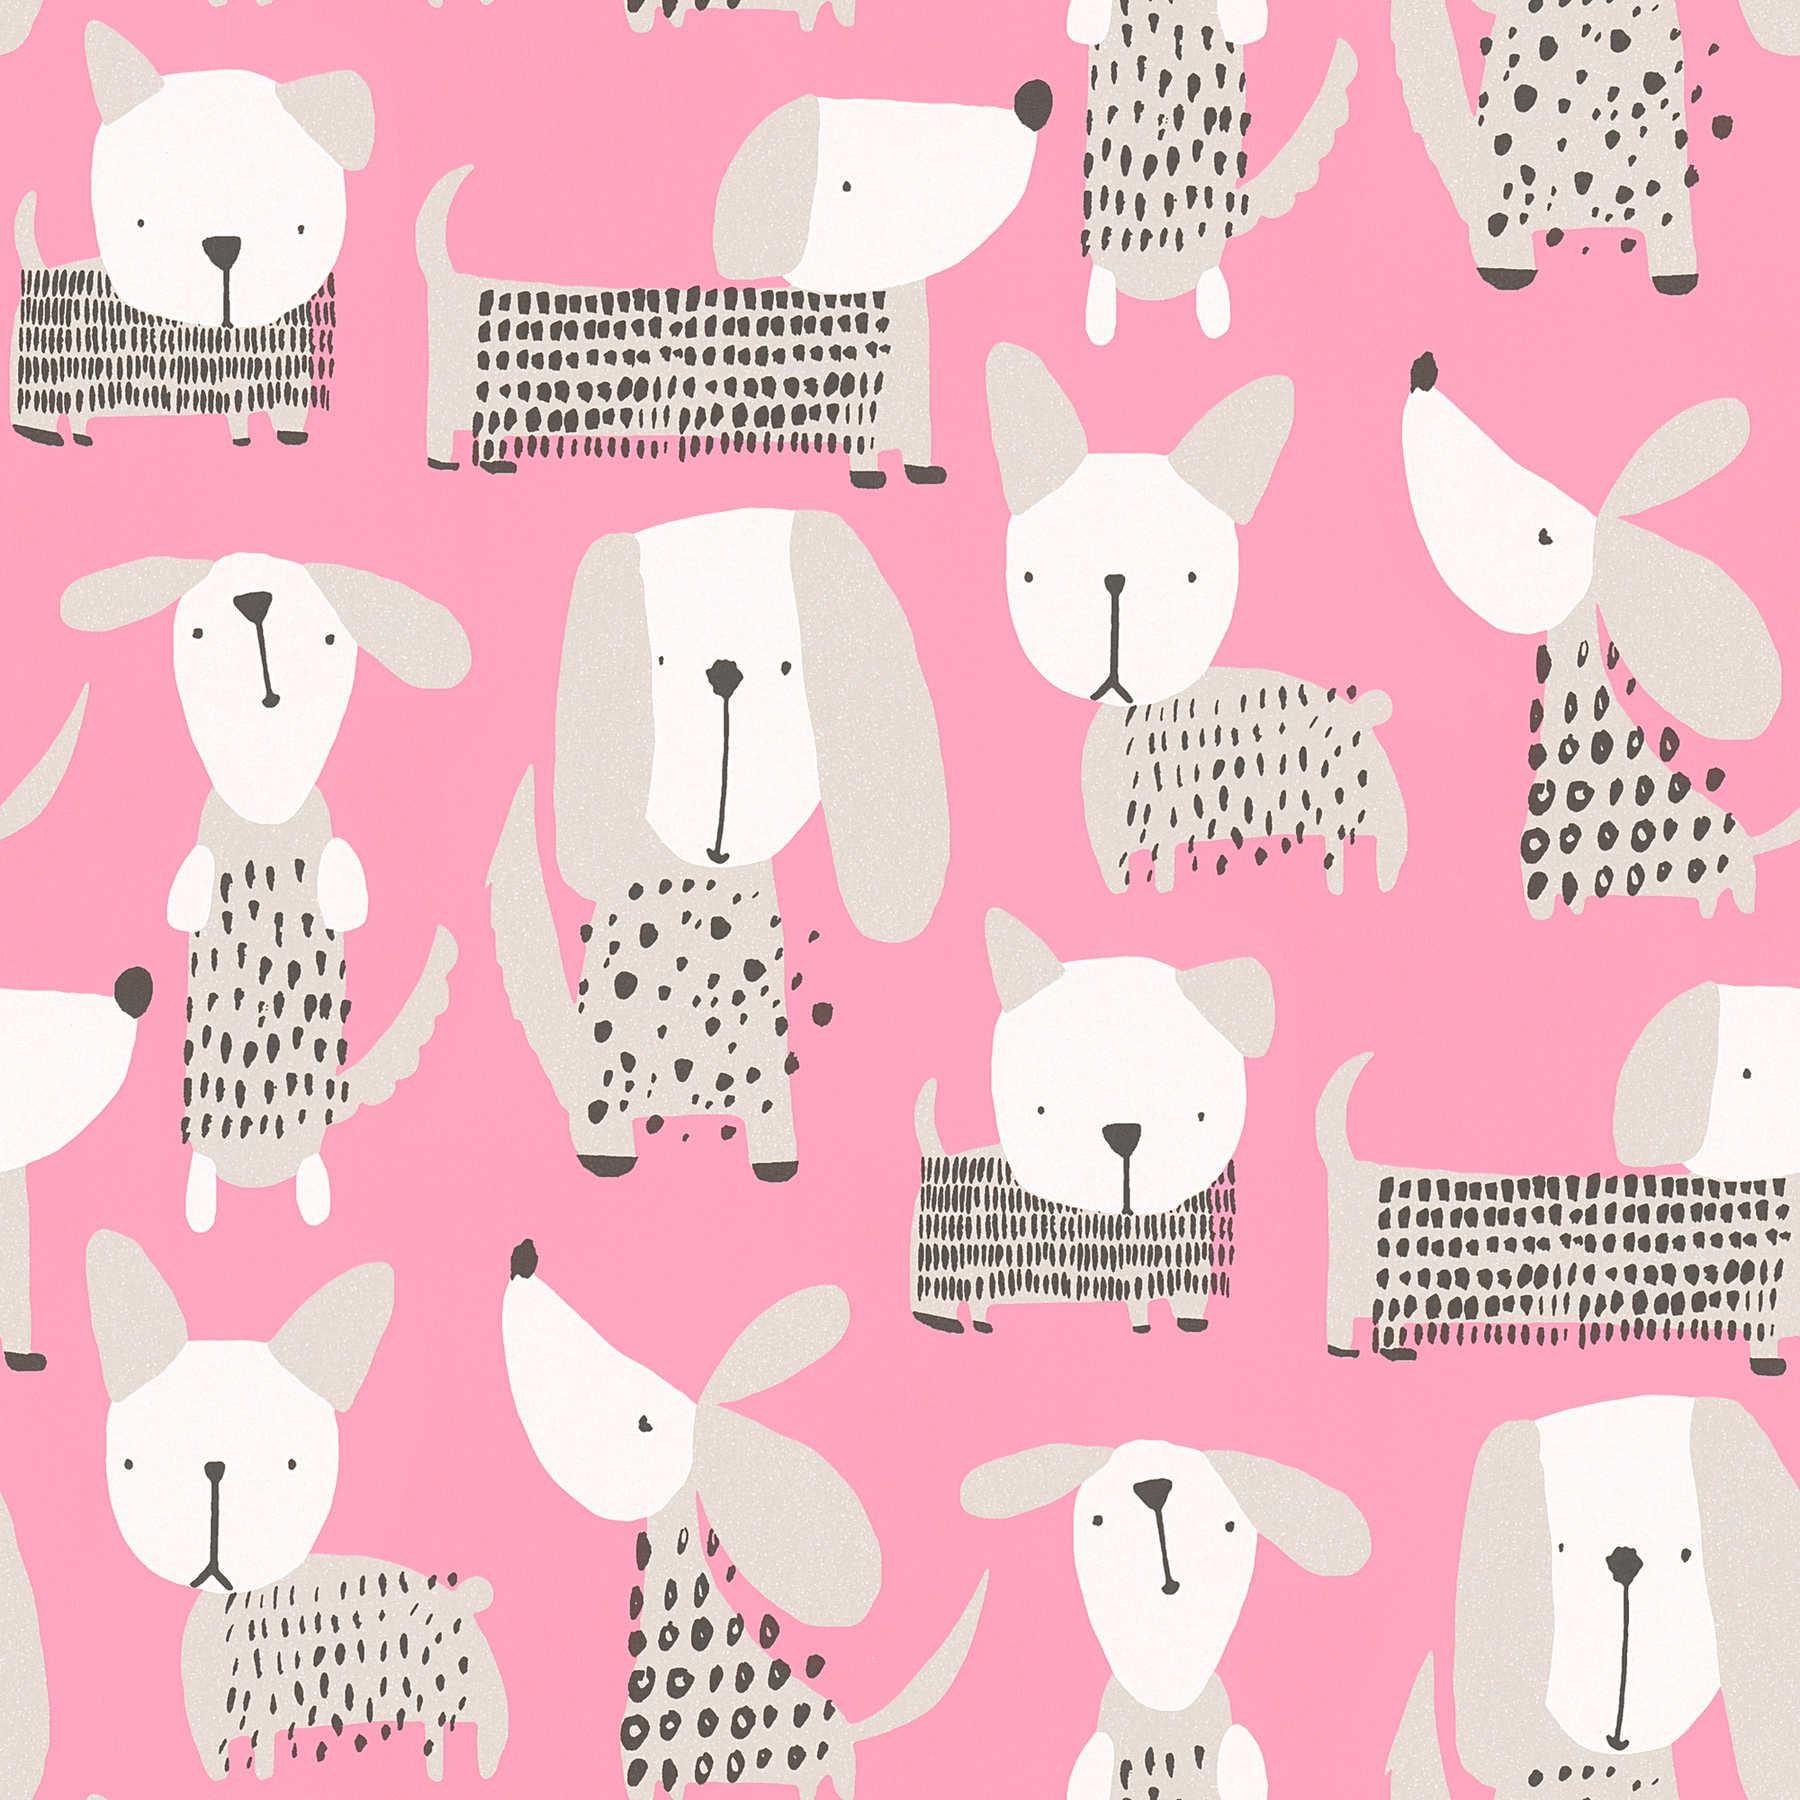         Dog wallpaper in cartoon style for Nursery - pink, white
    